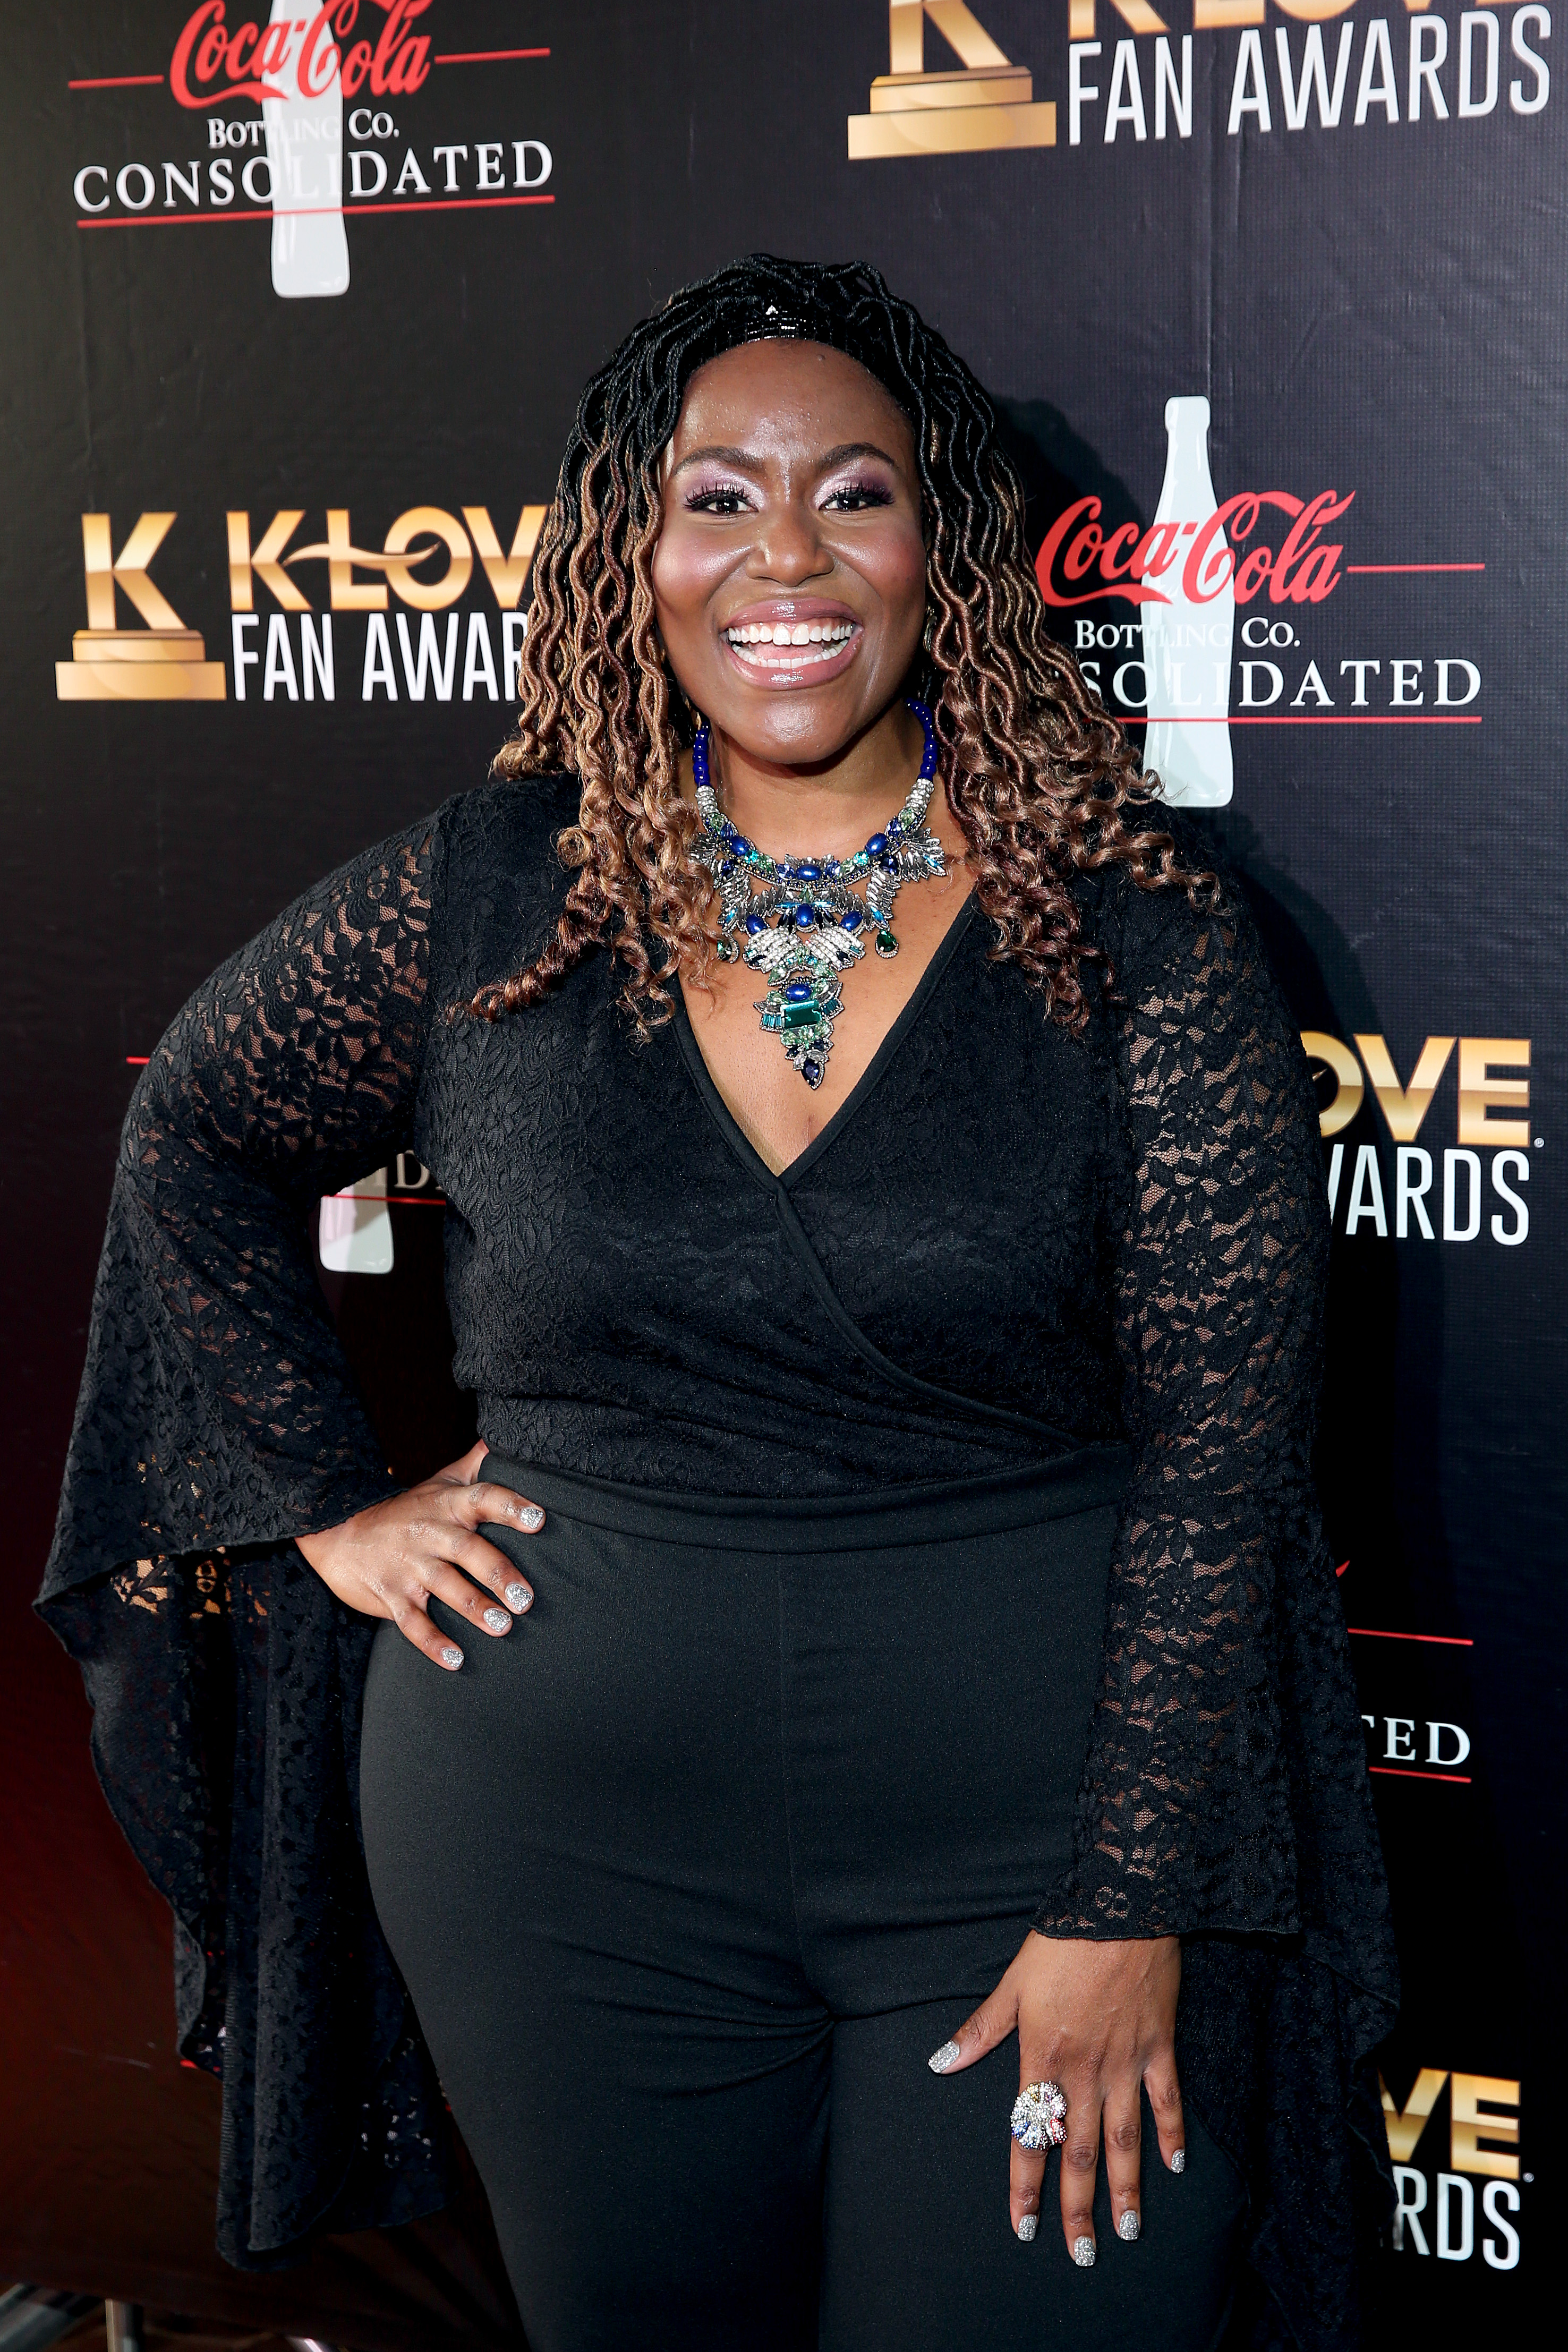 Mandisa Hundley on June 2, 2019, in Nashville, Tennessee. | Source: Getty Images